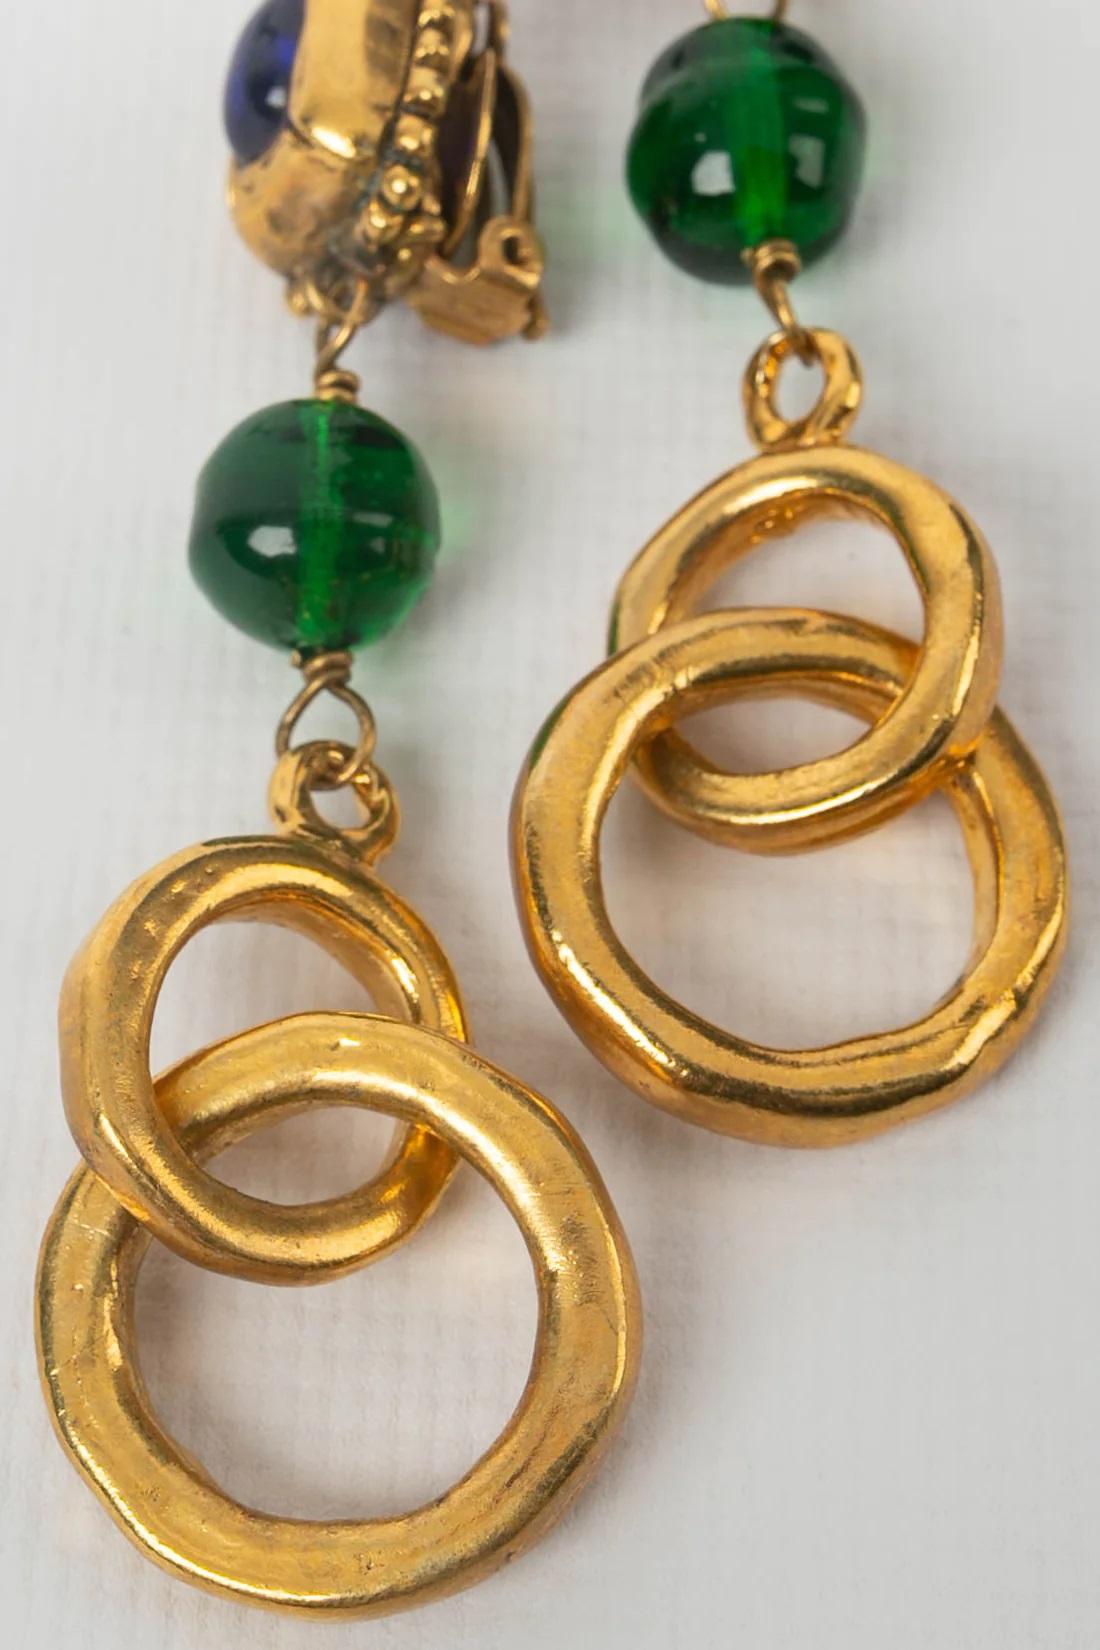 Women's Chanel Drop Earrings in Gilded Metal and Glass Paste